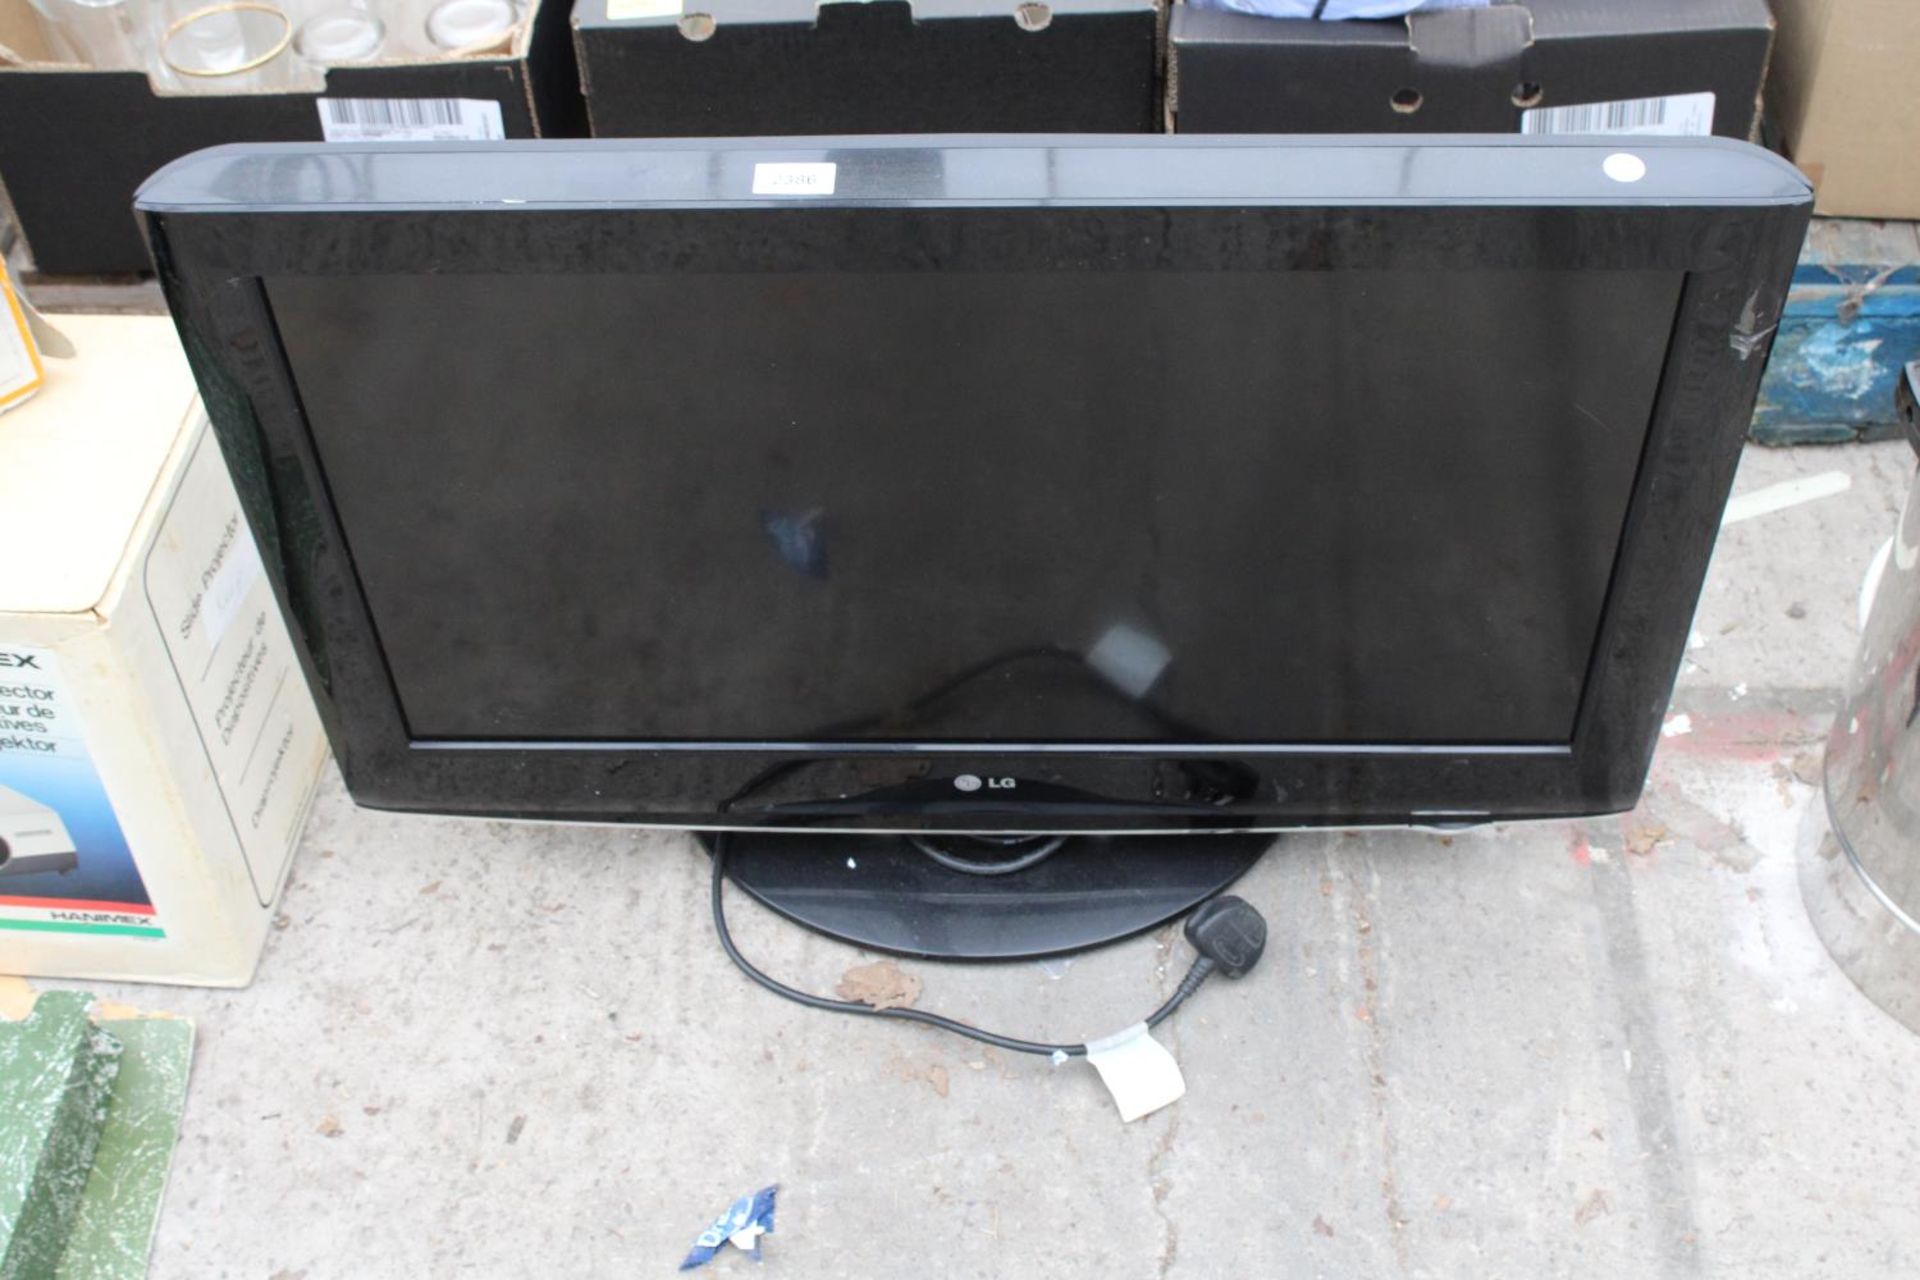 AN LG 32" TELEVISION AND REMOTE CONTROL, VENDOR STATES WORKING ORDER, NO WARRANTY GIVEN